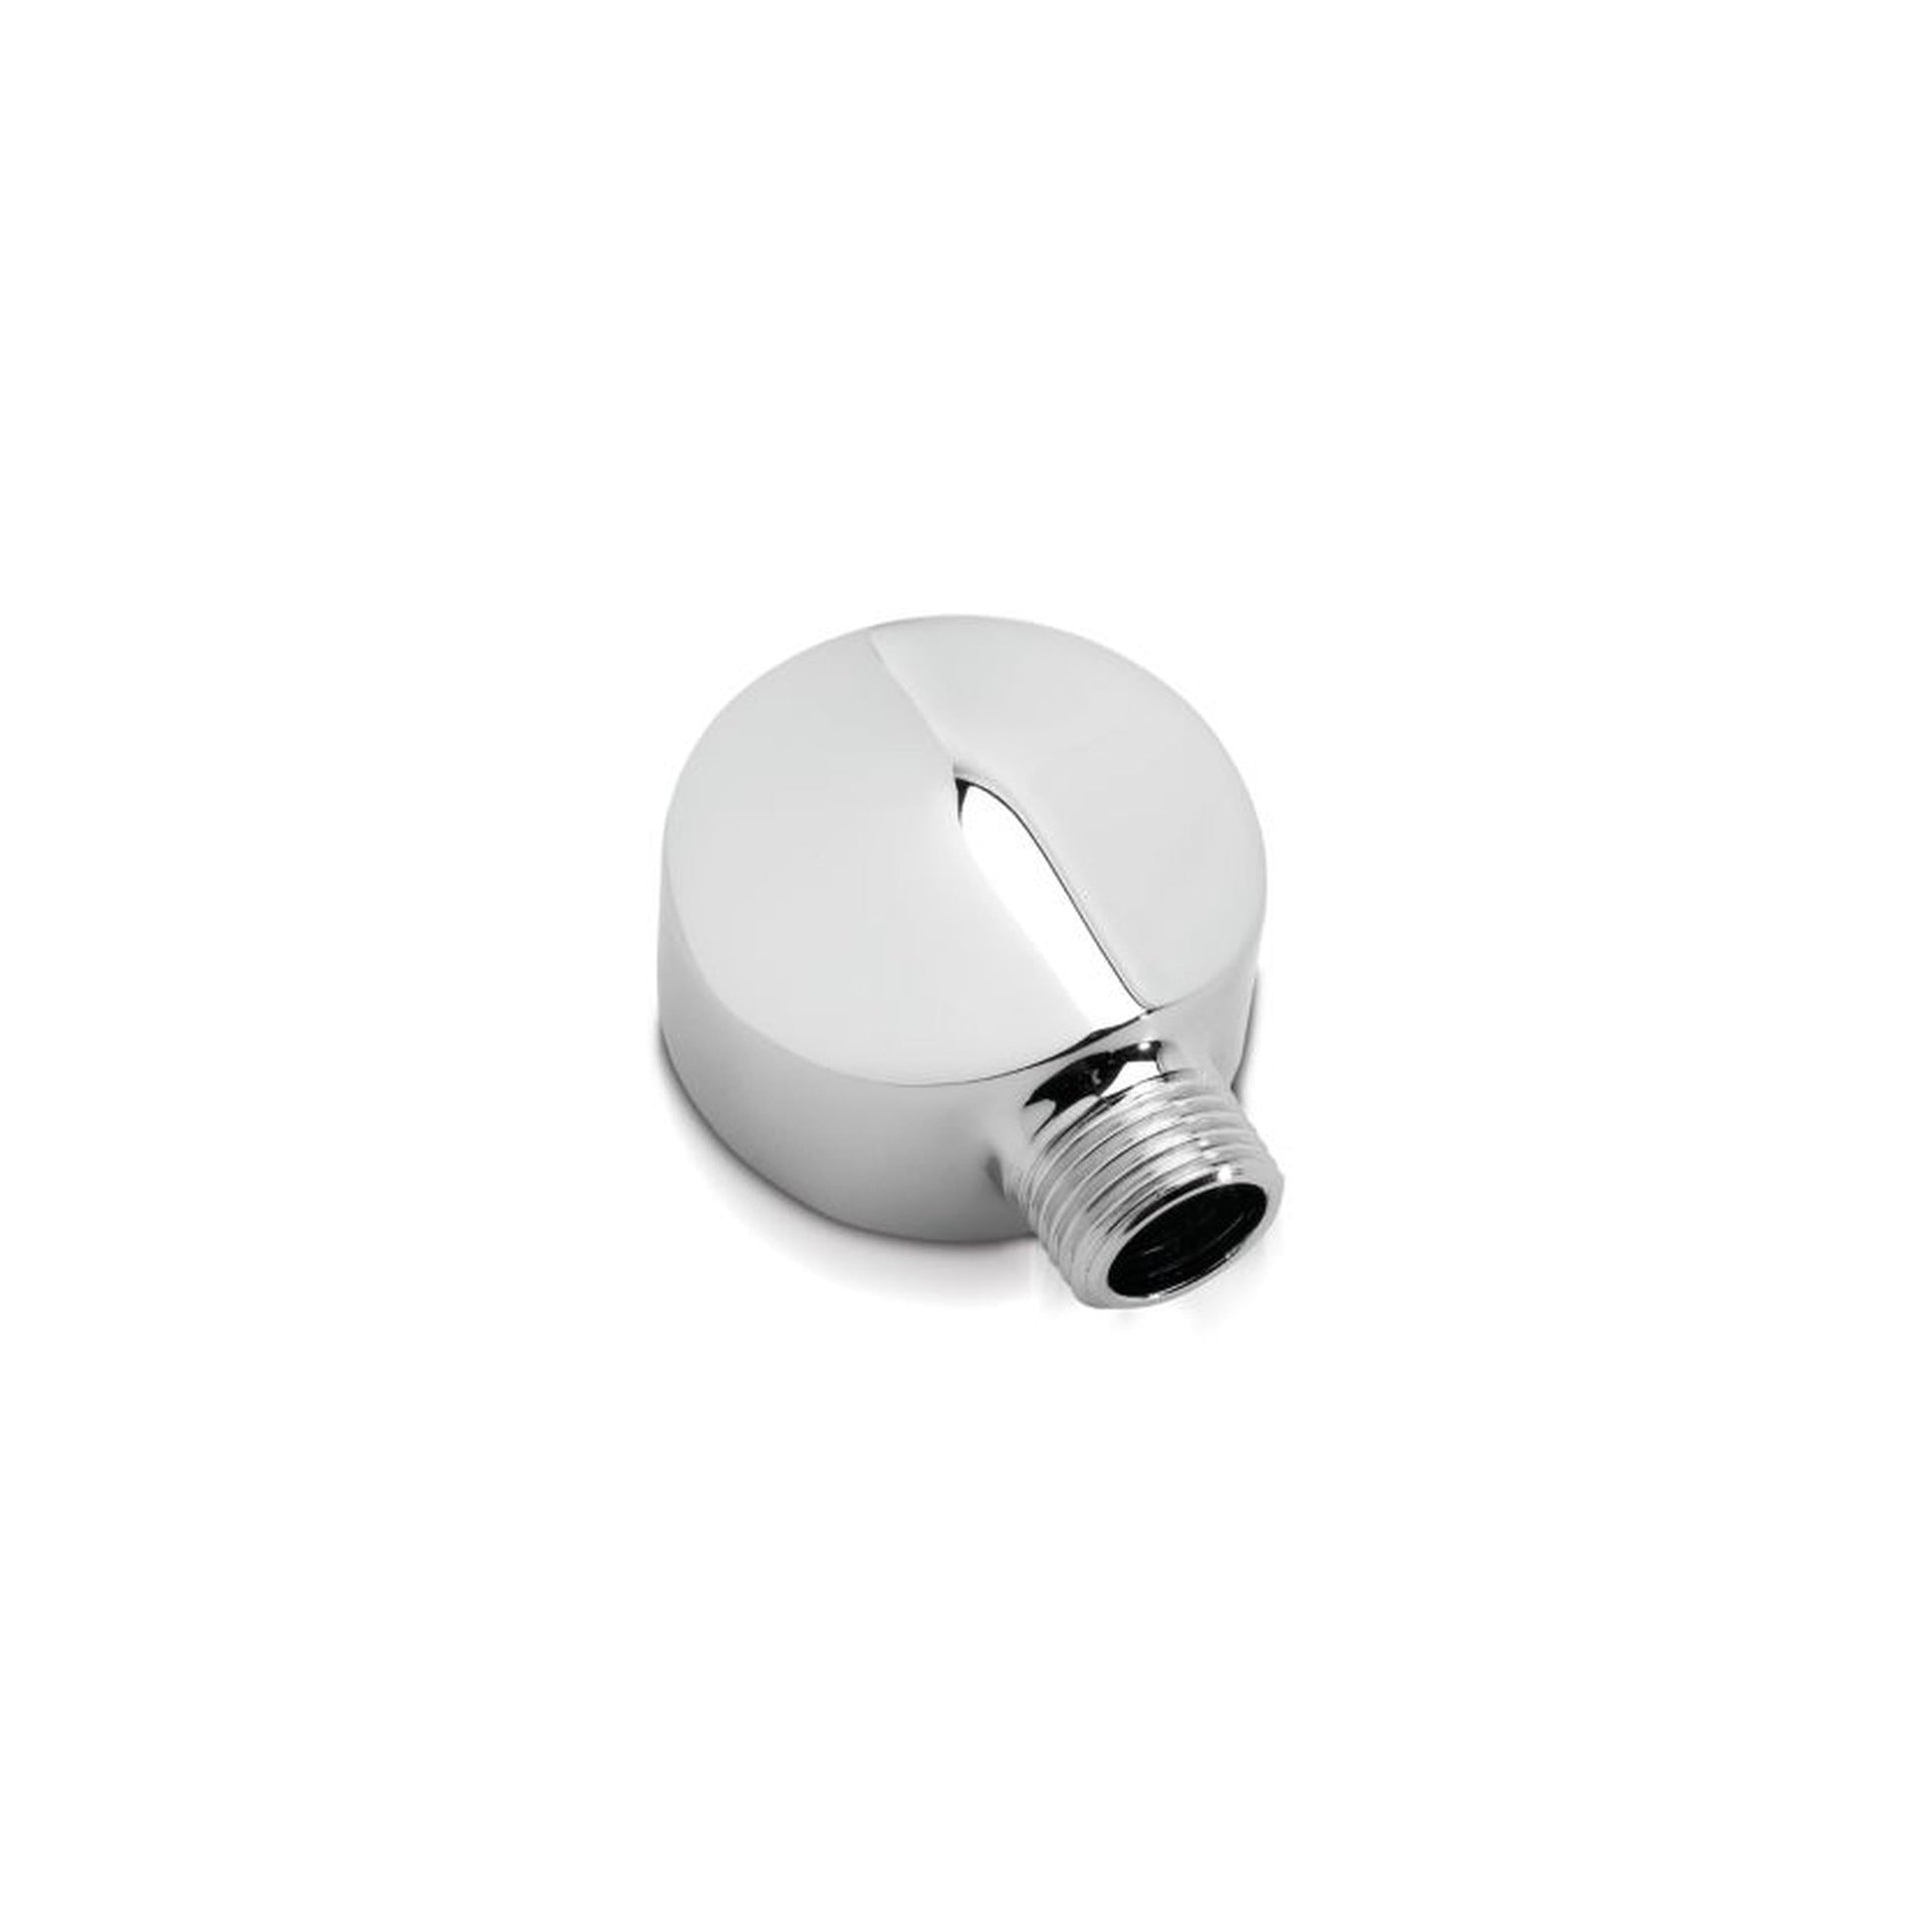 Toto Wall Outlet Polished Nickel